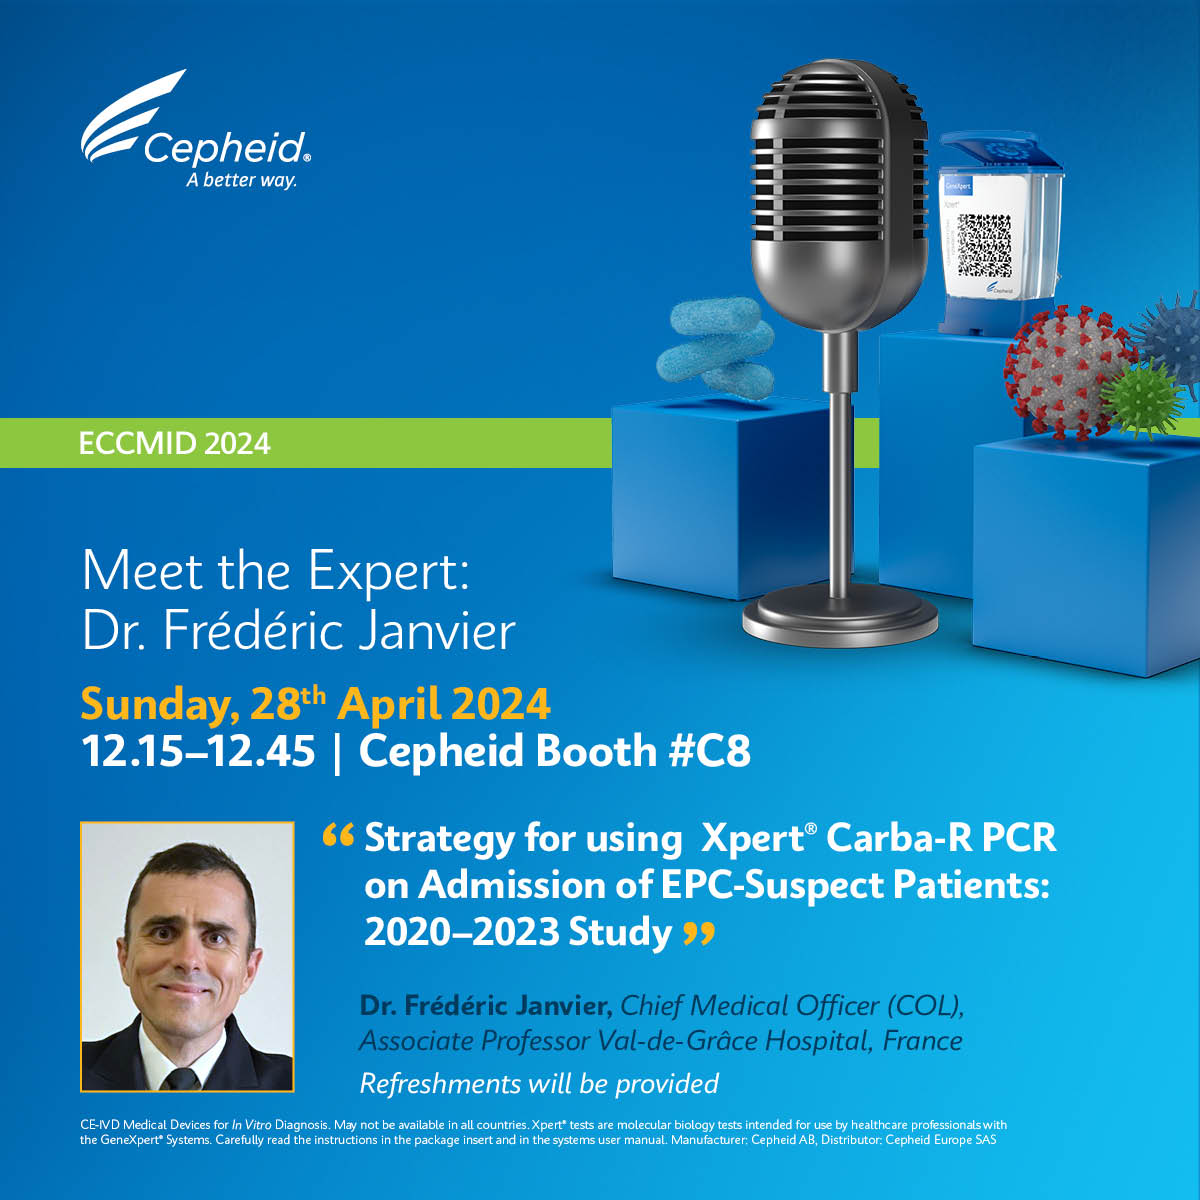 At #ESCMIDGlobal meet the experts at Cepheid Booth #C8 as they present their latest findings in highly interactive presentations, Q&A, and exchanges. Register: info.cepheid.com/2024-CHNL-PWP-…